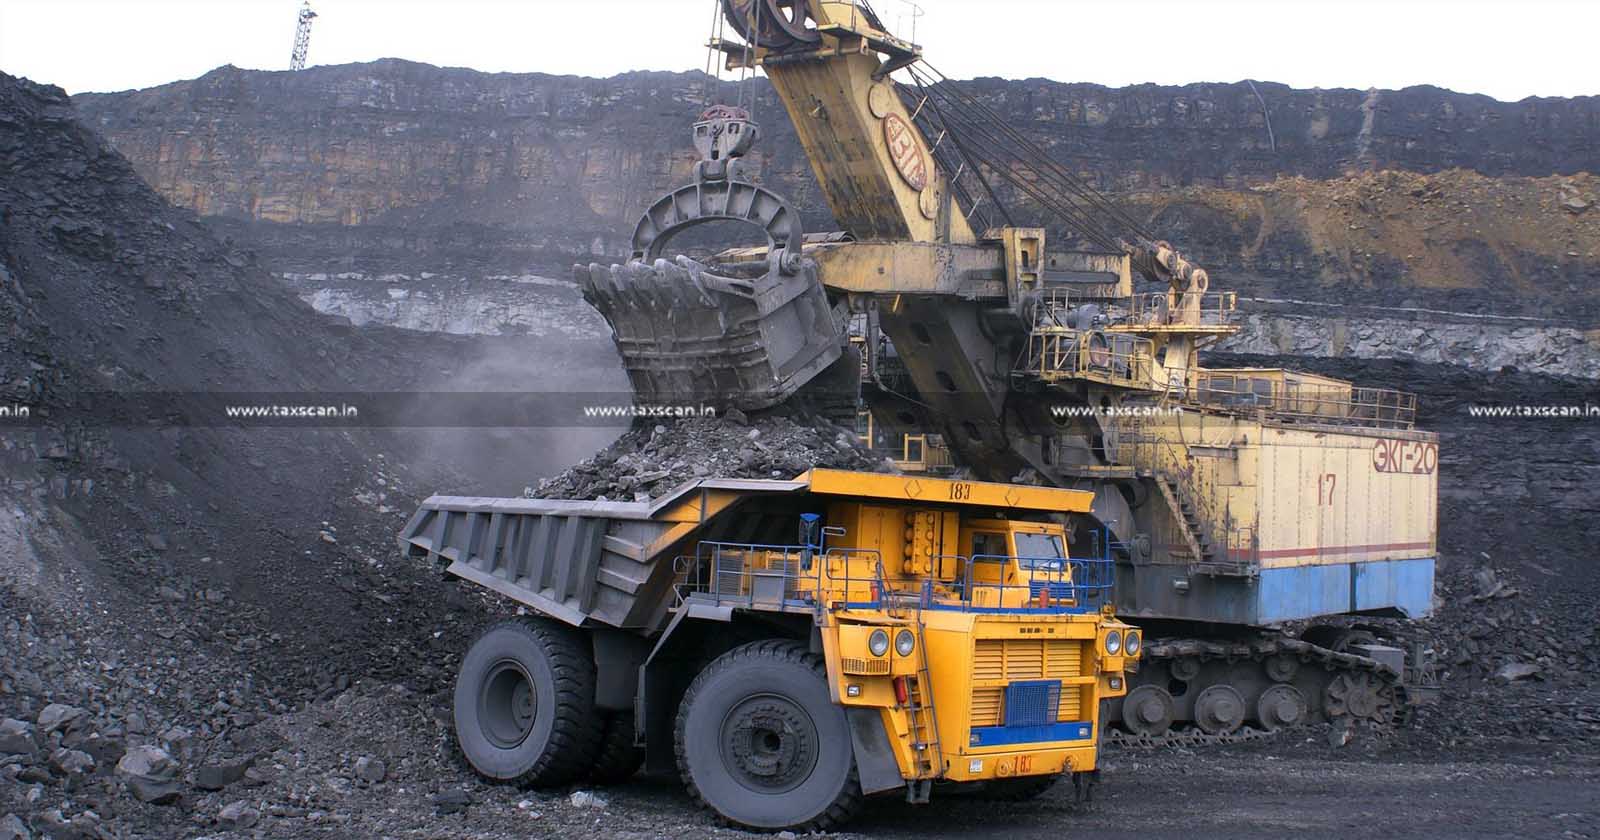 Mining Services - Service Tax - CESTAT set aside Demand of Service Tax by Invoking Extended Period - CESTAT - CESTAT set aside Demand of Service Tax - Demand of Service Tax - Taxscan